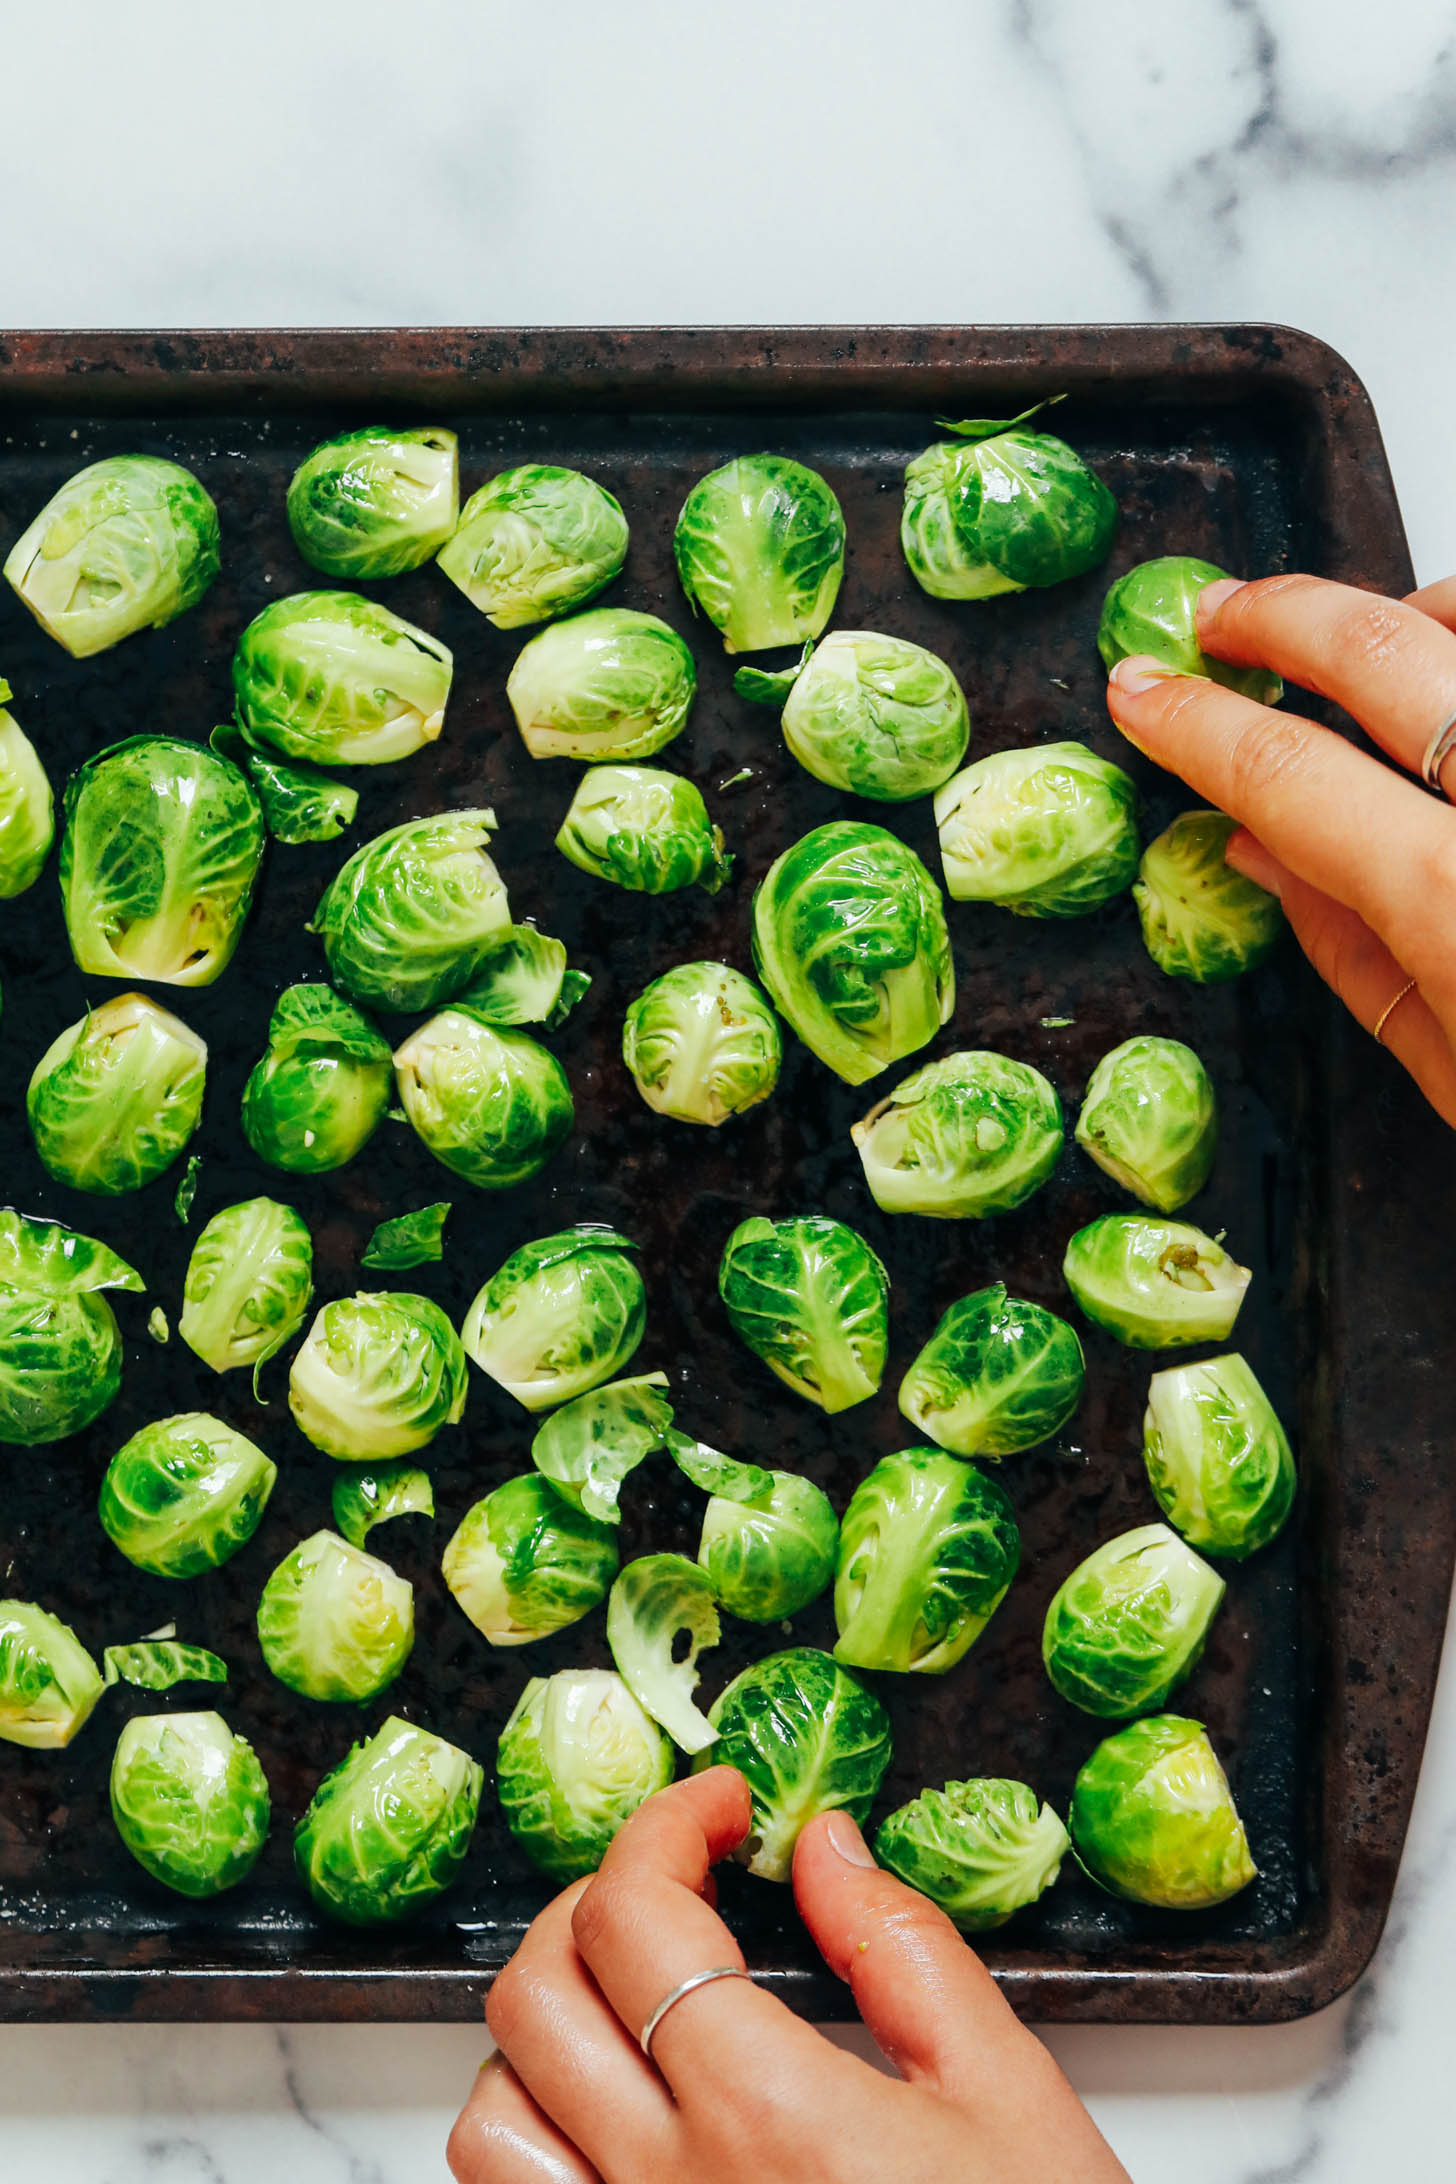 Hands turning Brussels sprouts cut side down on a baking sheet